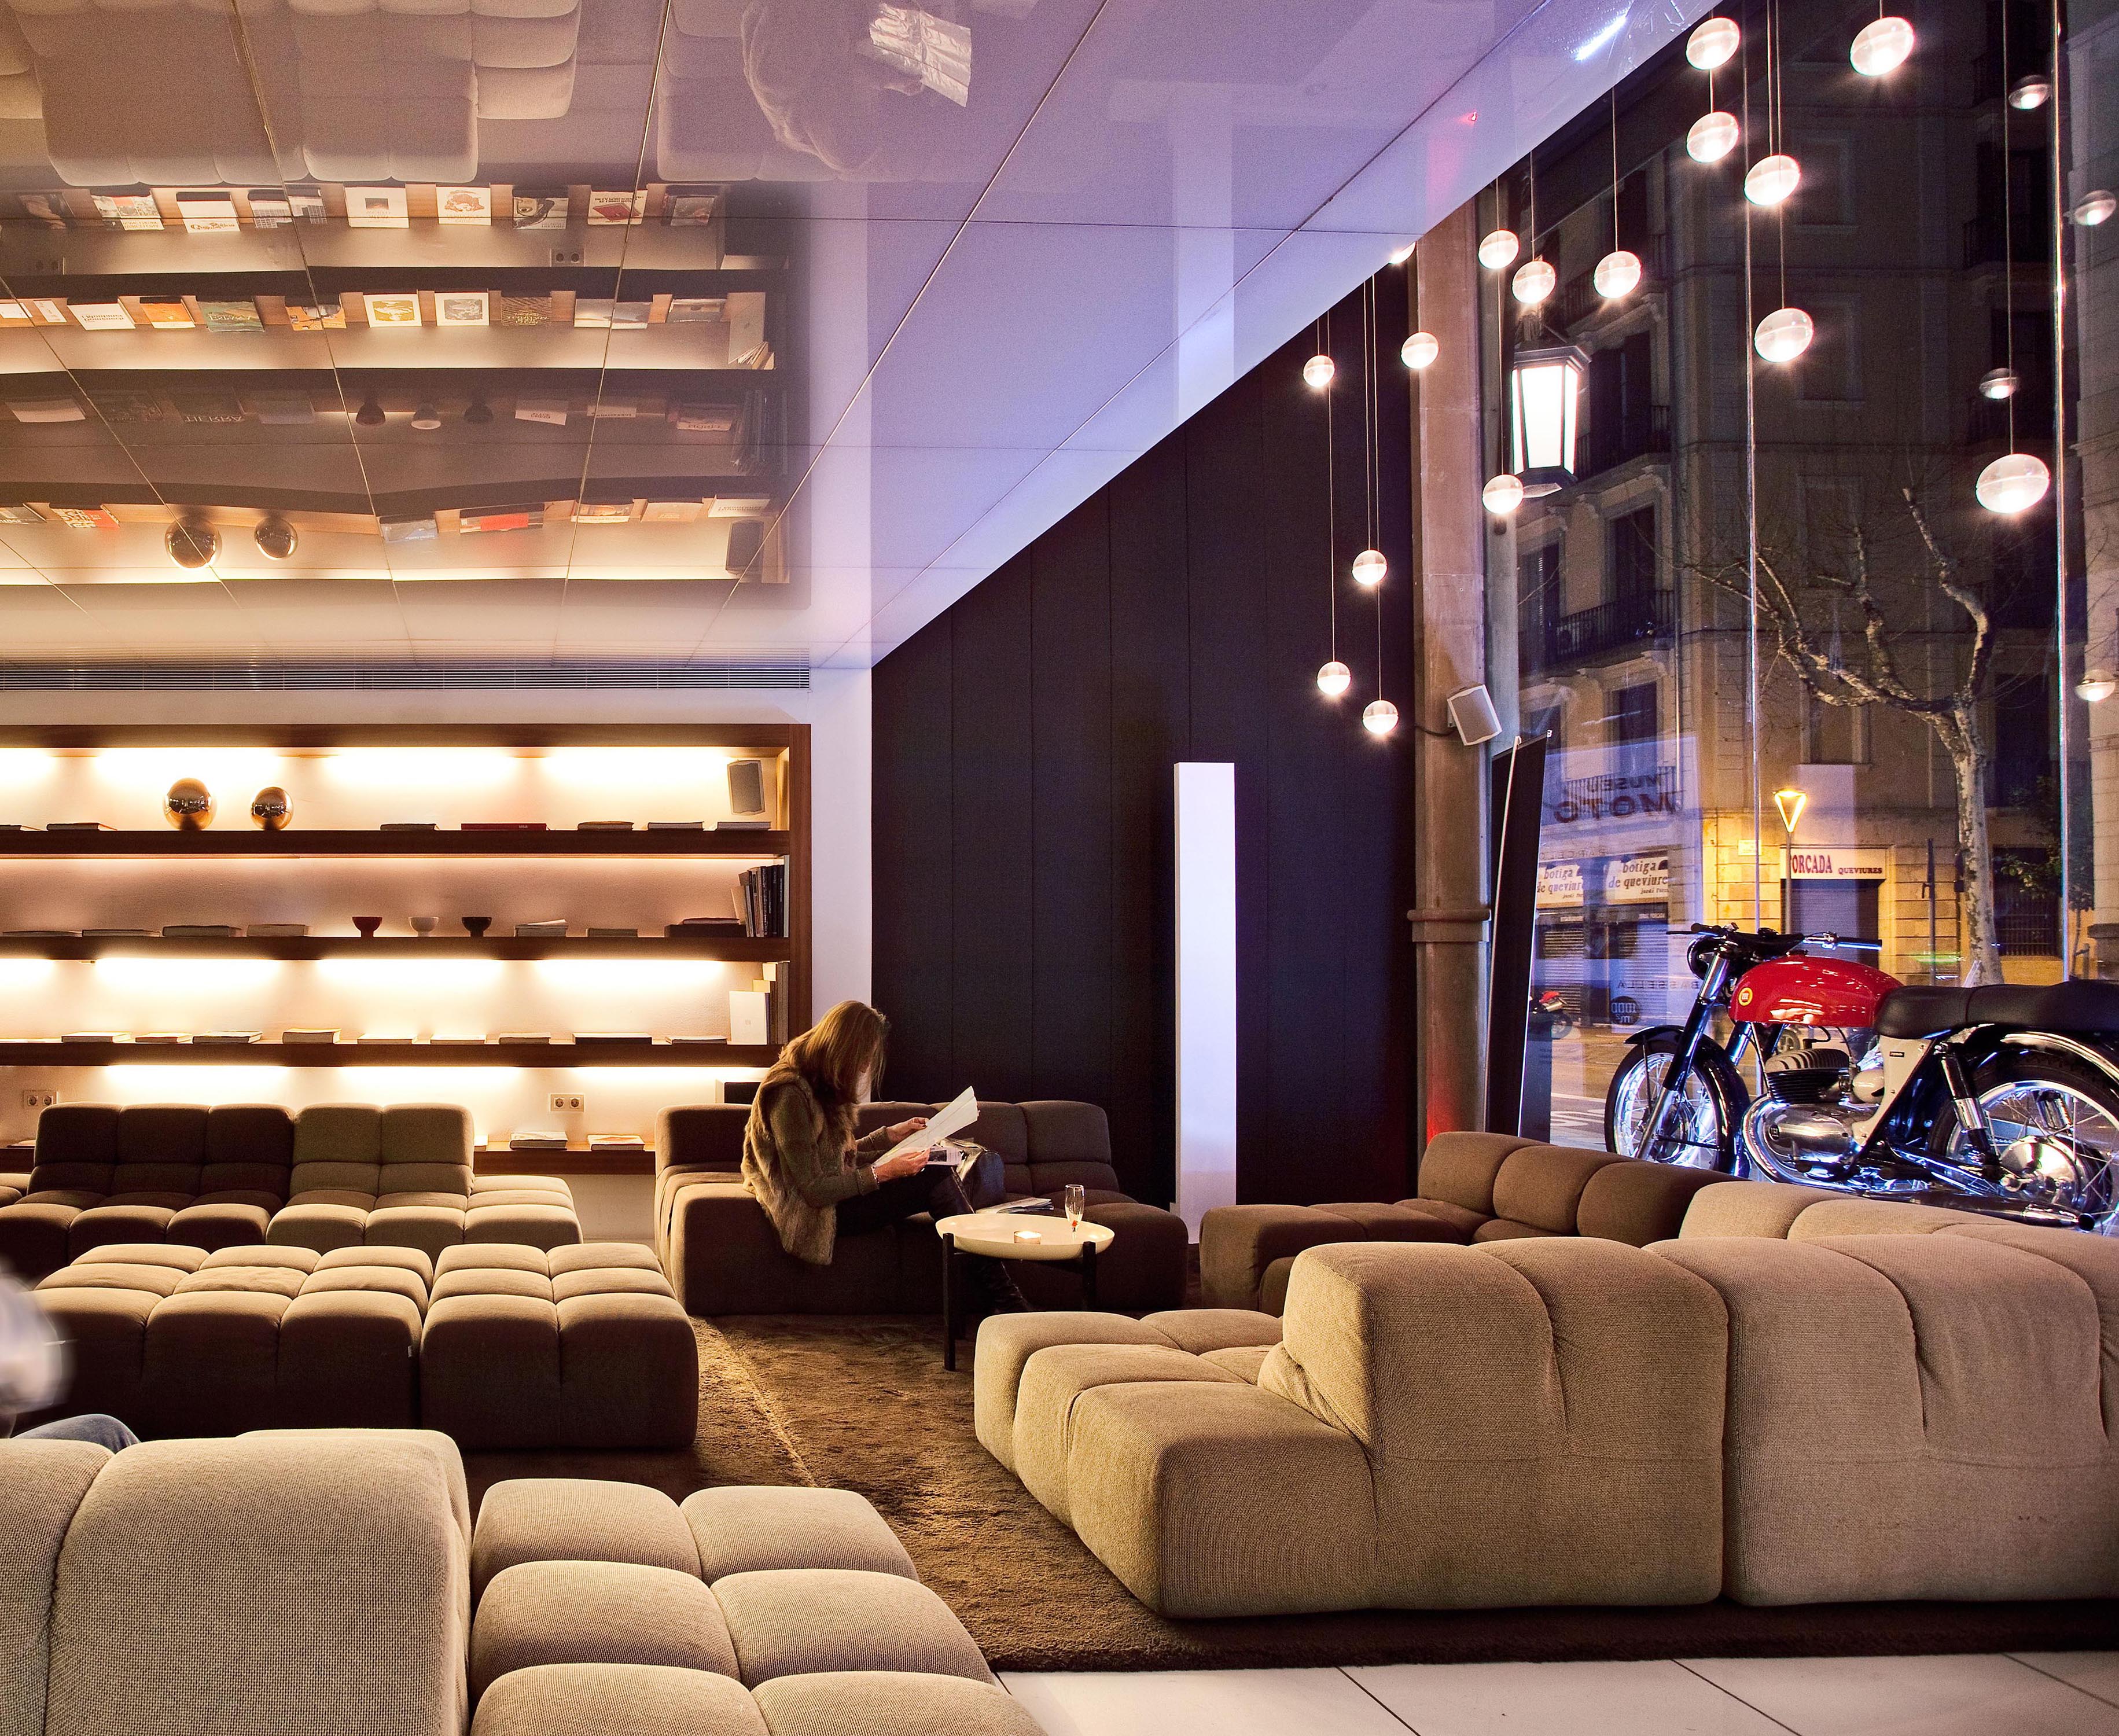 Woman Reading in Lobby Lounge Seating Area with Decorative Motorcycle